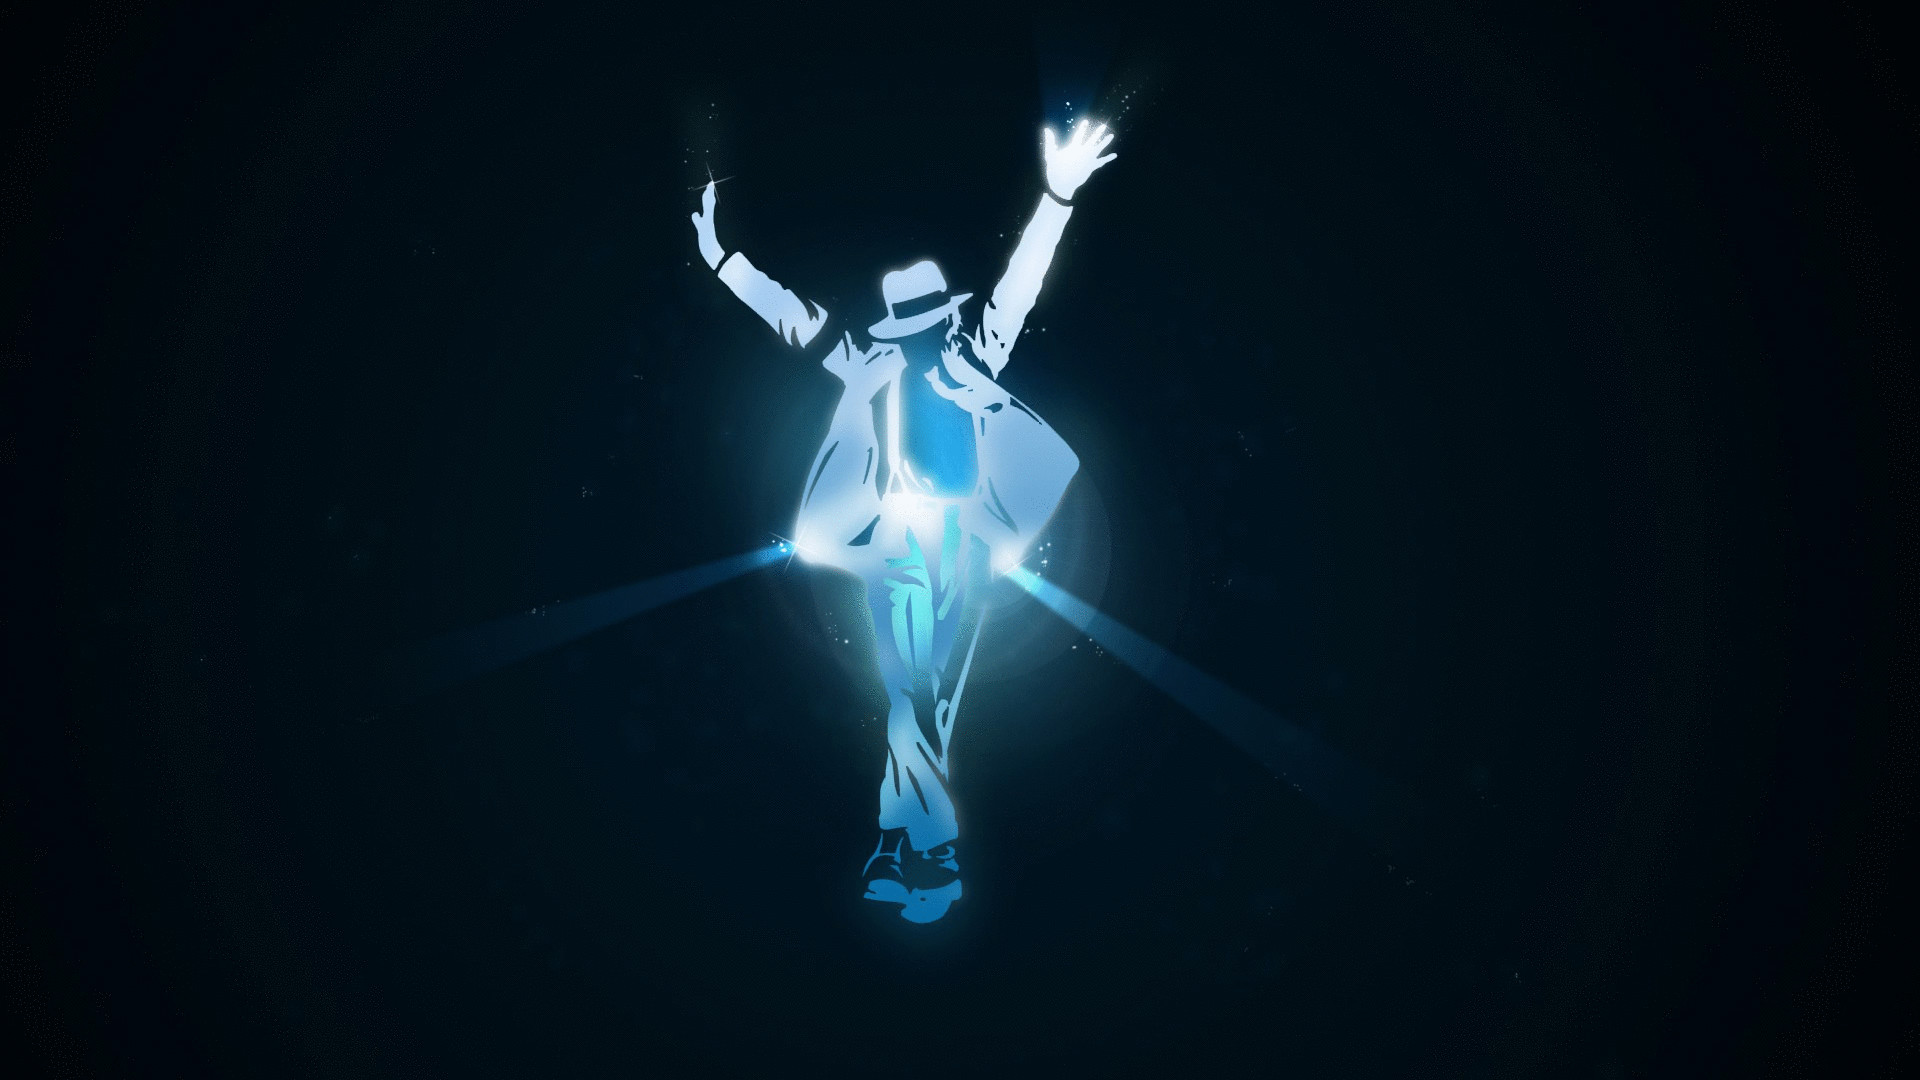 1920x1080 Search Results for “michael jackson logo wallpaper” – Adorable Wallpapers